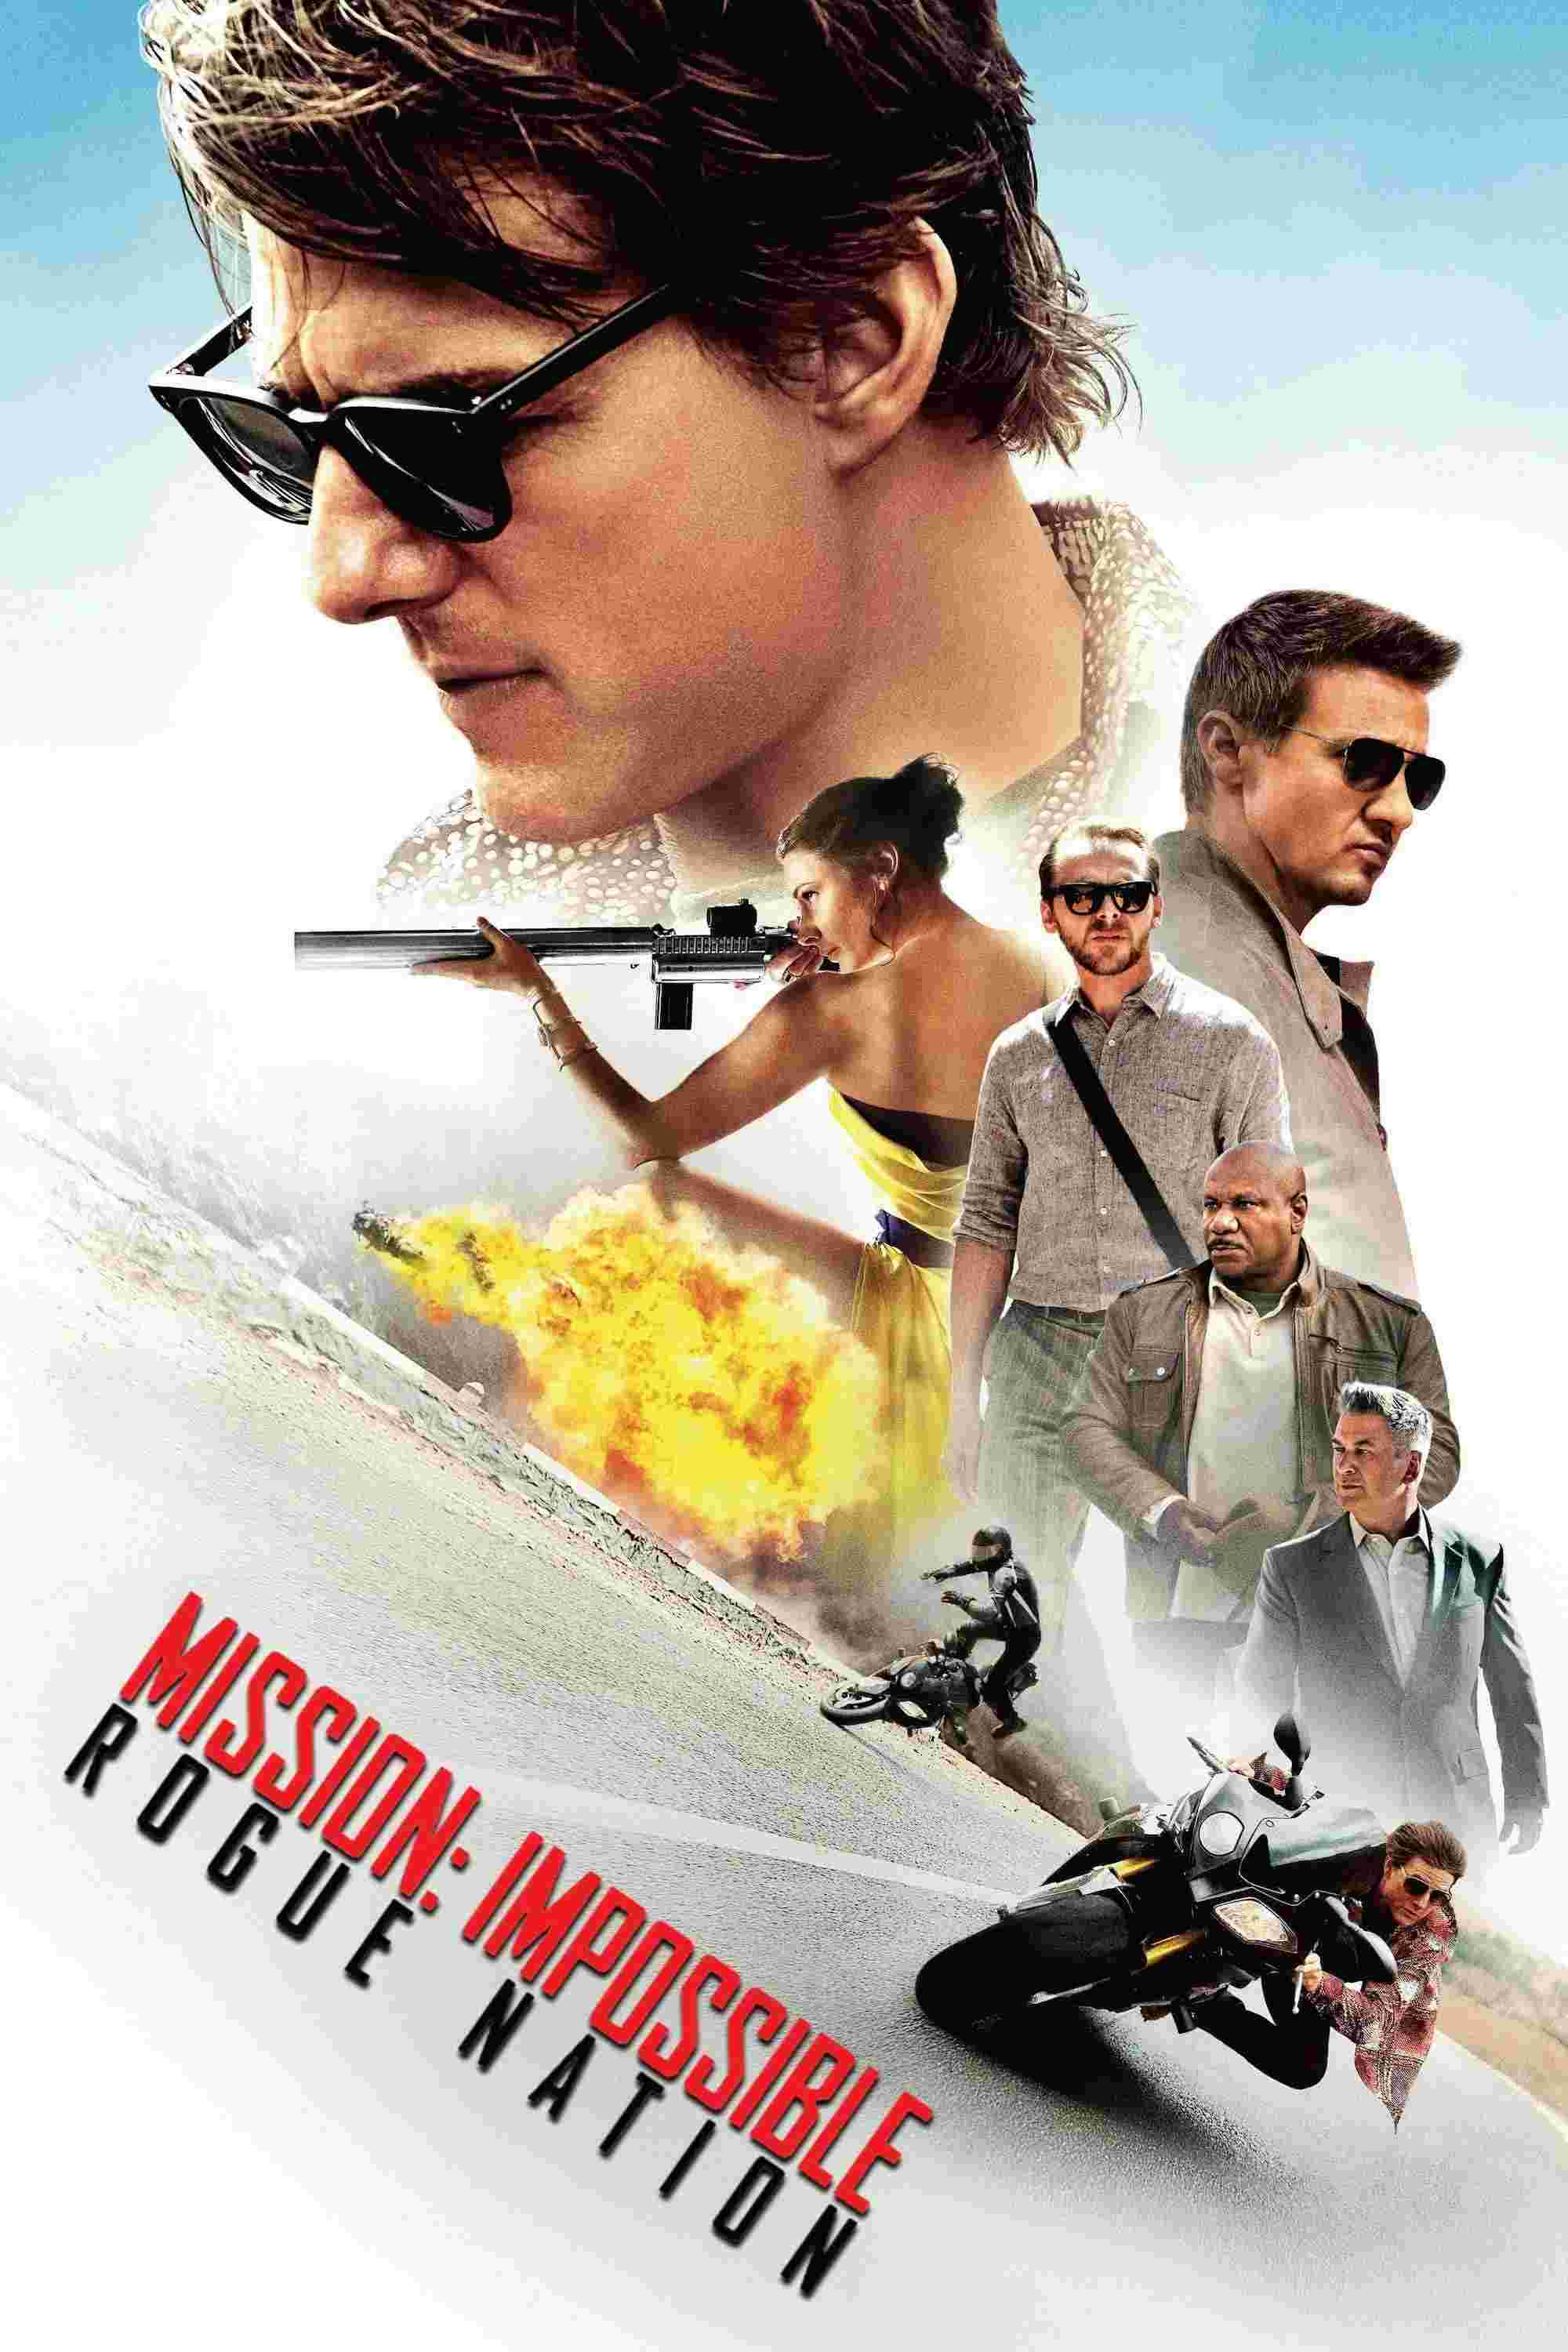 Mission: Impossible - Rogue Nation (2015) Tom Cruise